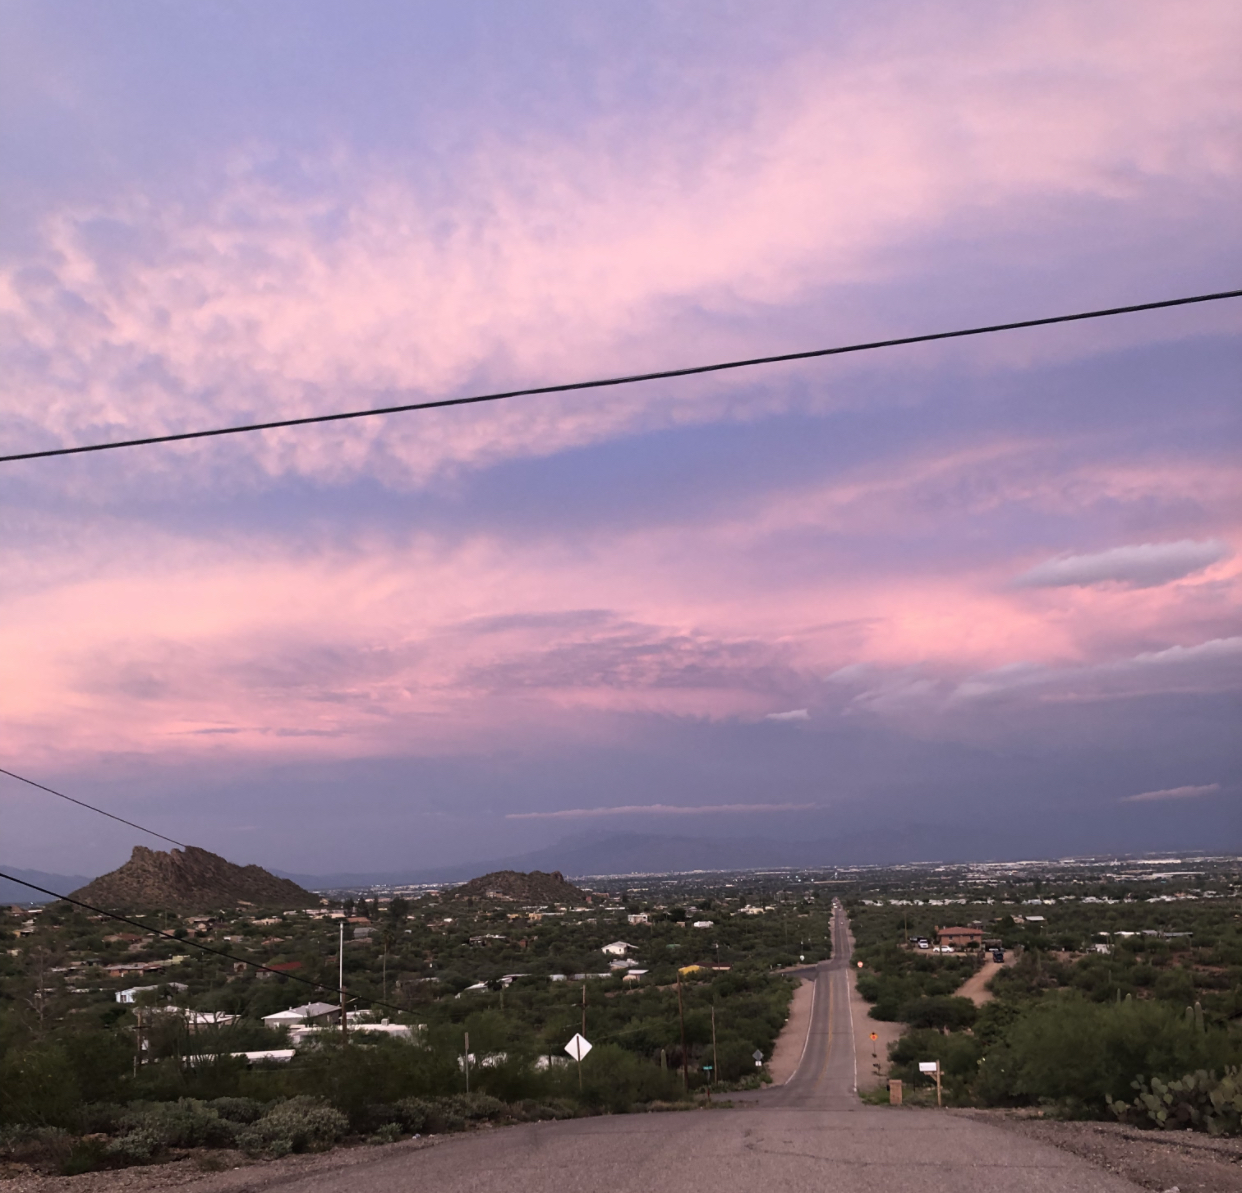 Photo by Sara Alvarez machado  |  In this picture I took a break from school and drove to the highest peak on the way to the desert museum. The sky reminded me of cotton candy and sweetness and down below are Gods creations admiring his painting everyday. 